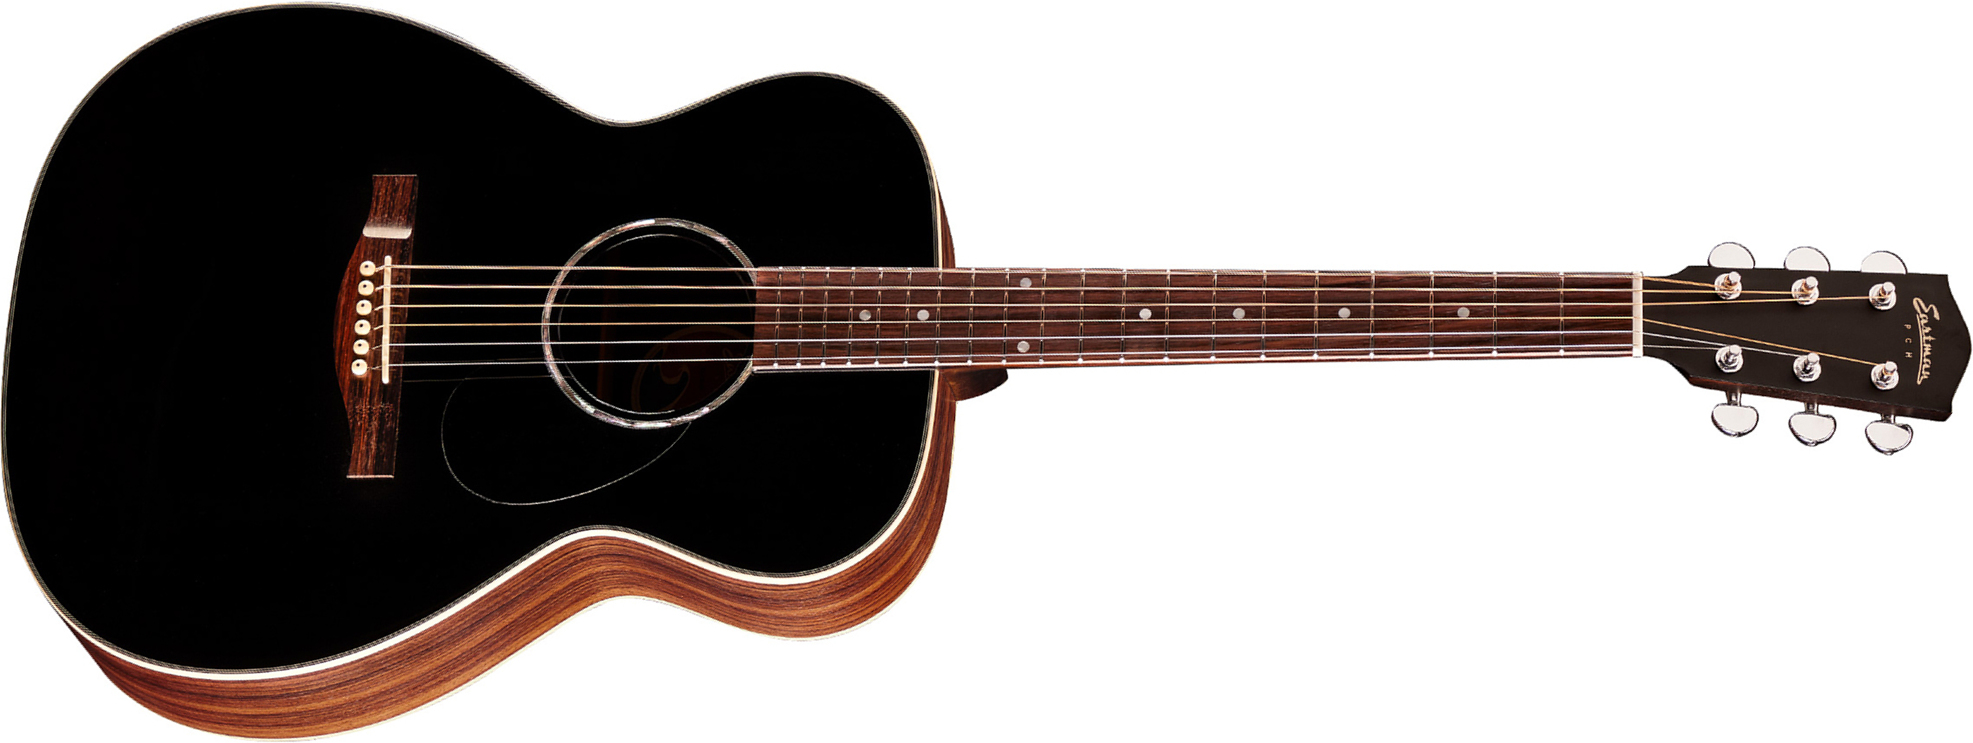 Eastman Pch2-om Orchestra Model Epicea Palissandre Rw - Black - Westerngitarre & electro - Main picture